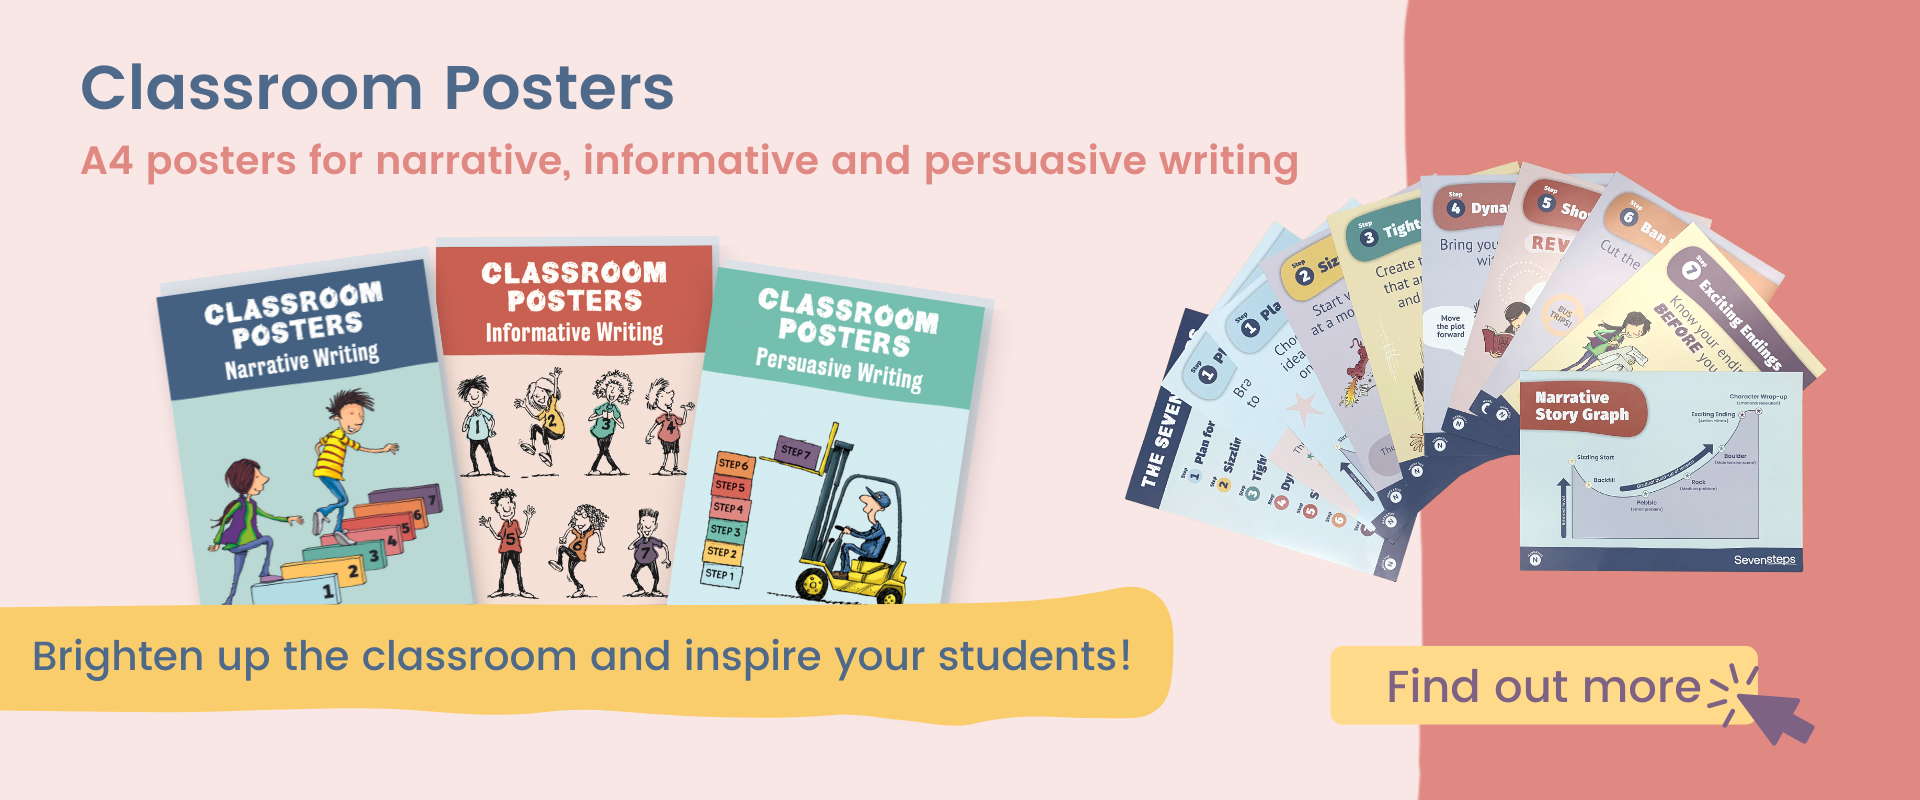 Back-to-school posters to brighten up your classroom